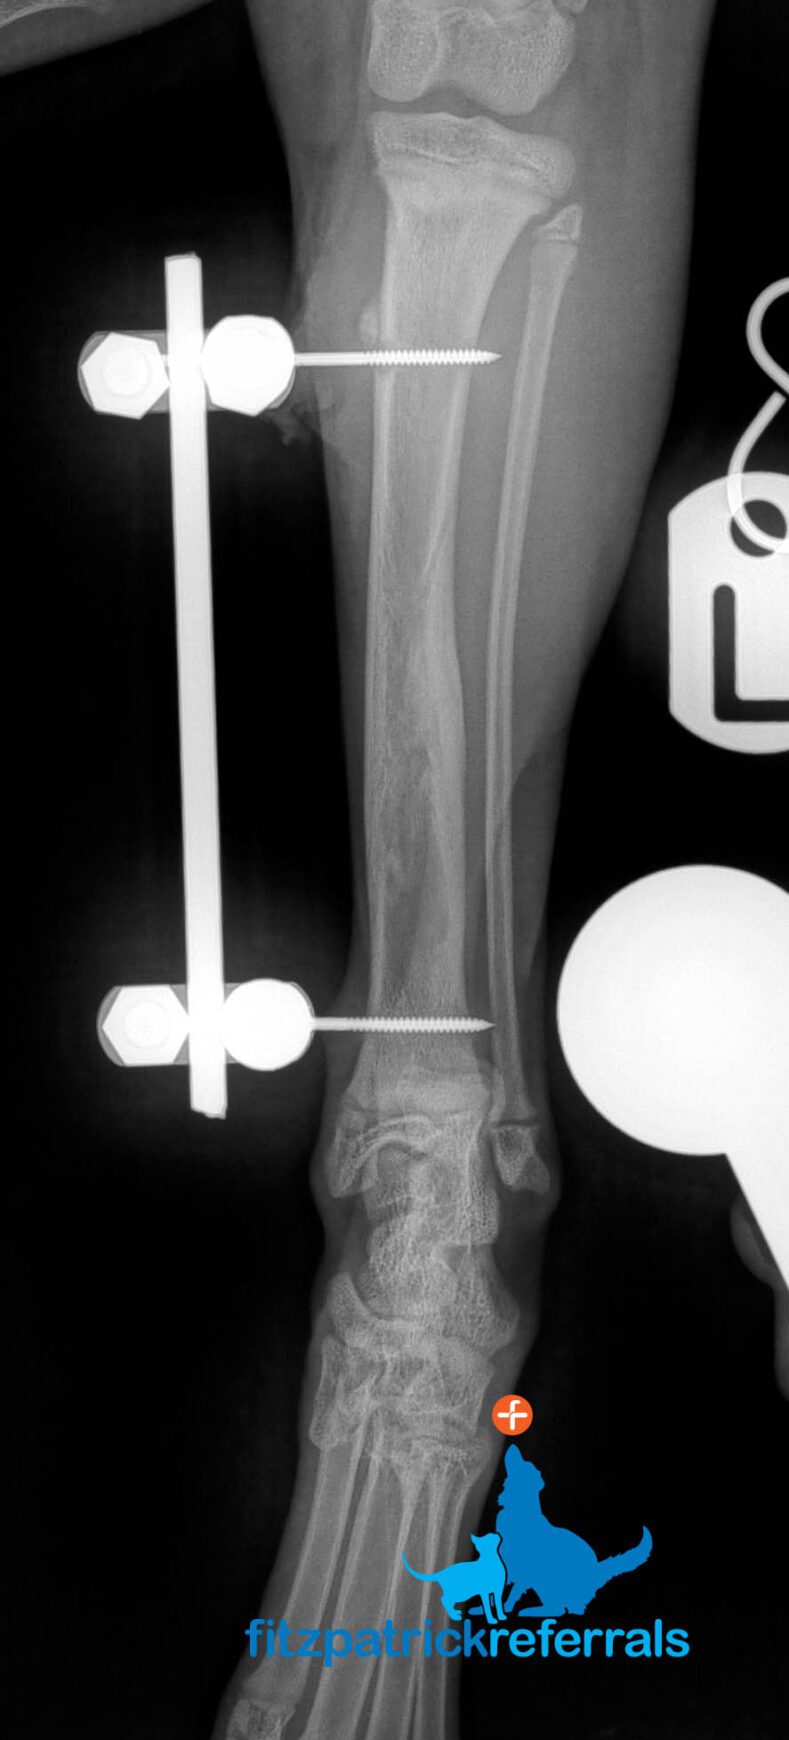 X-ray image of cat's hind leg and external frame